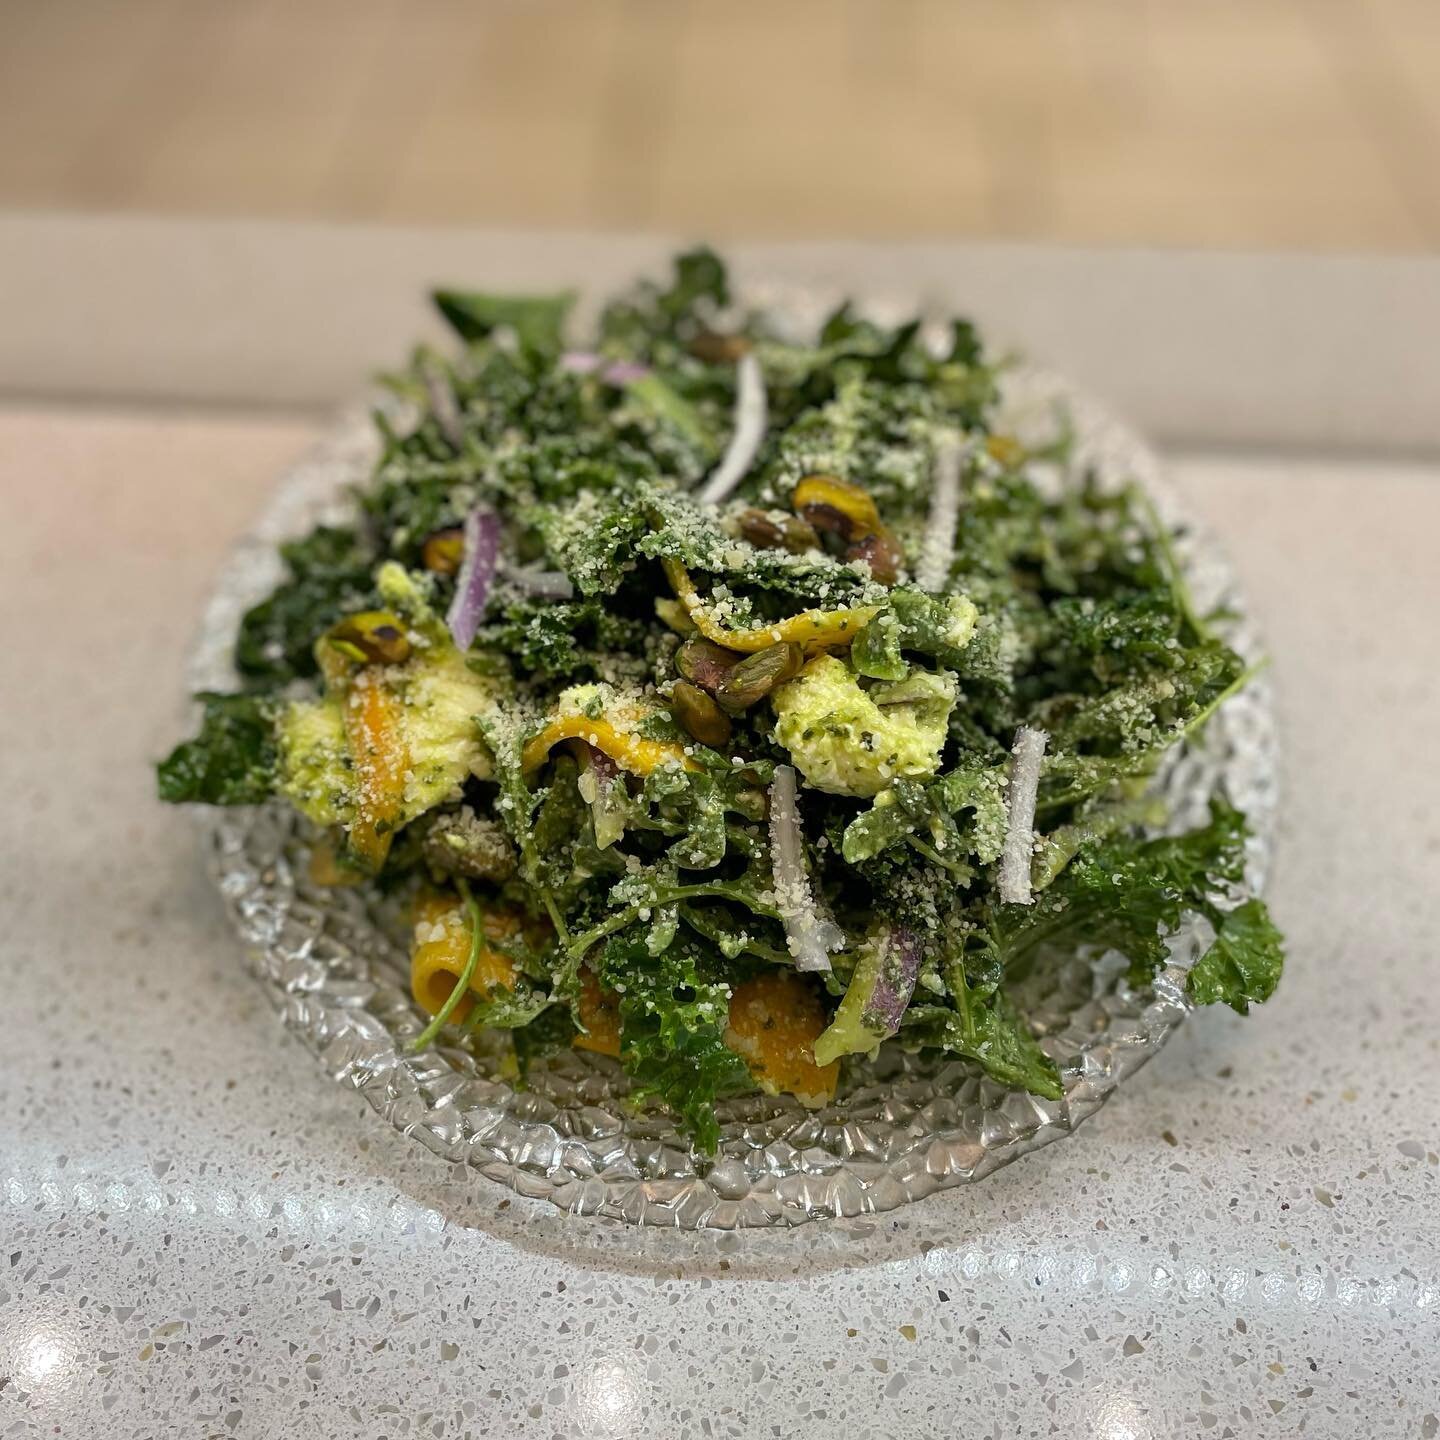 Oh kale yeah! We&rsquo;re mixing it up with a new salad!

Kale, Arugula, Butternut Squash, Red Onion, Pistachio, Burrata, Pesto

Order one this weekend along with @matildamke chocolate cakes and heart shaped pizzas ❤️